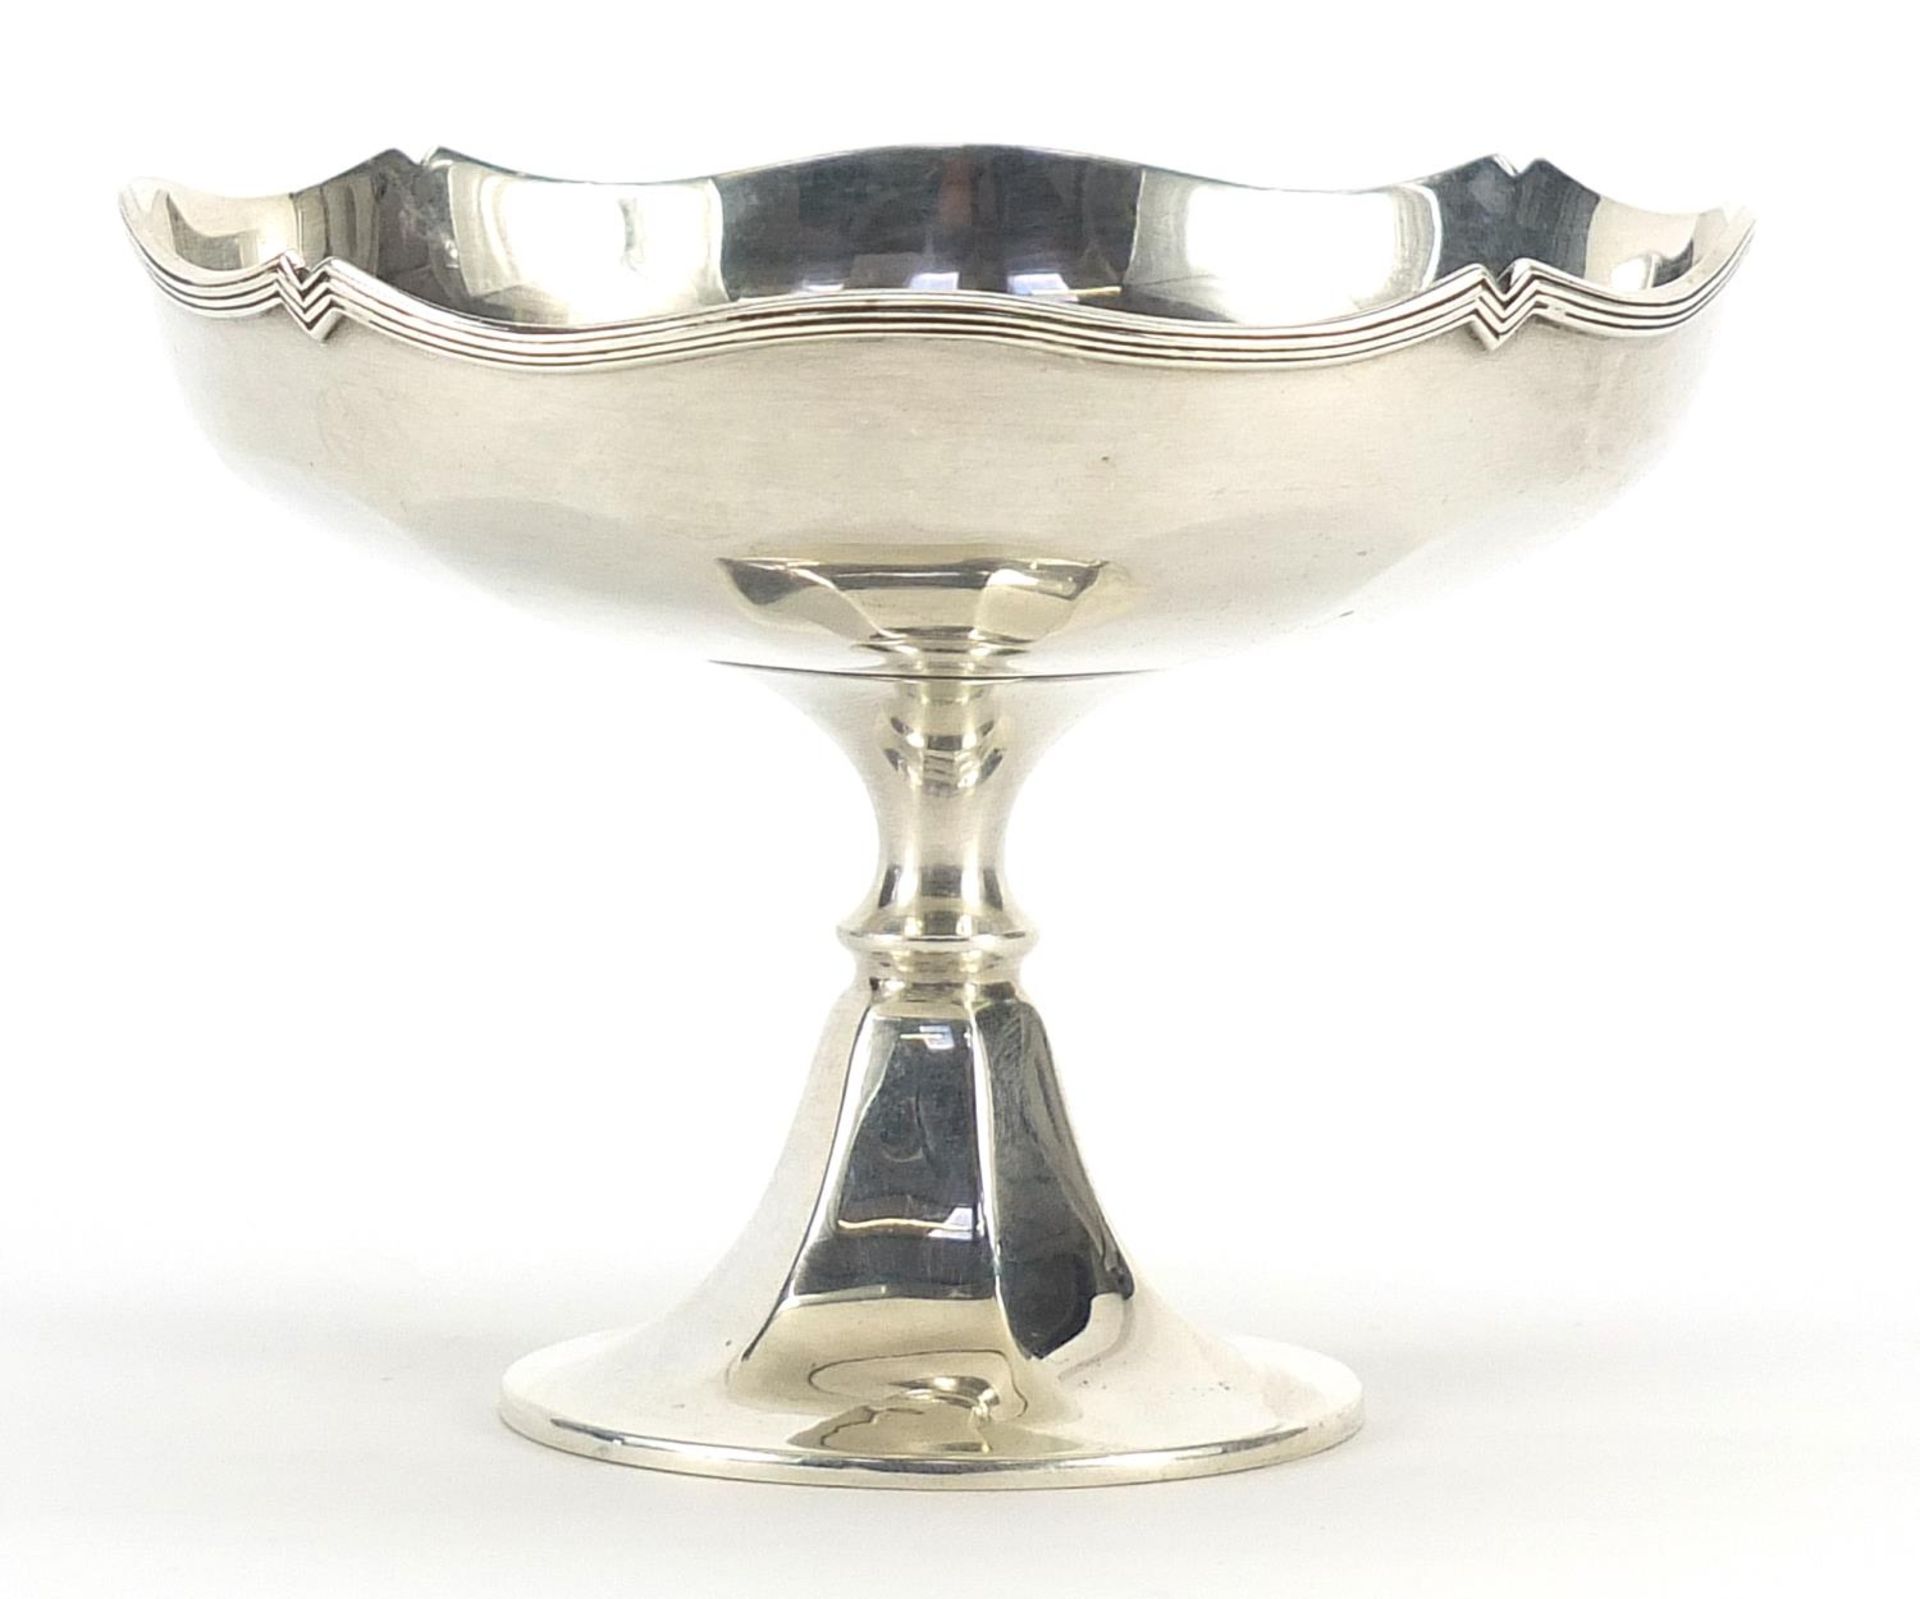 Edward Souter Barnsley & Co, silver pedestal dish, indistinct date letter, 8cm high x 10.5cm in - Image 2 of 4